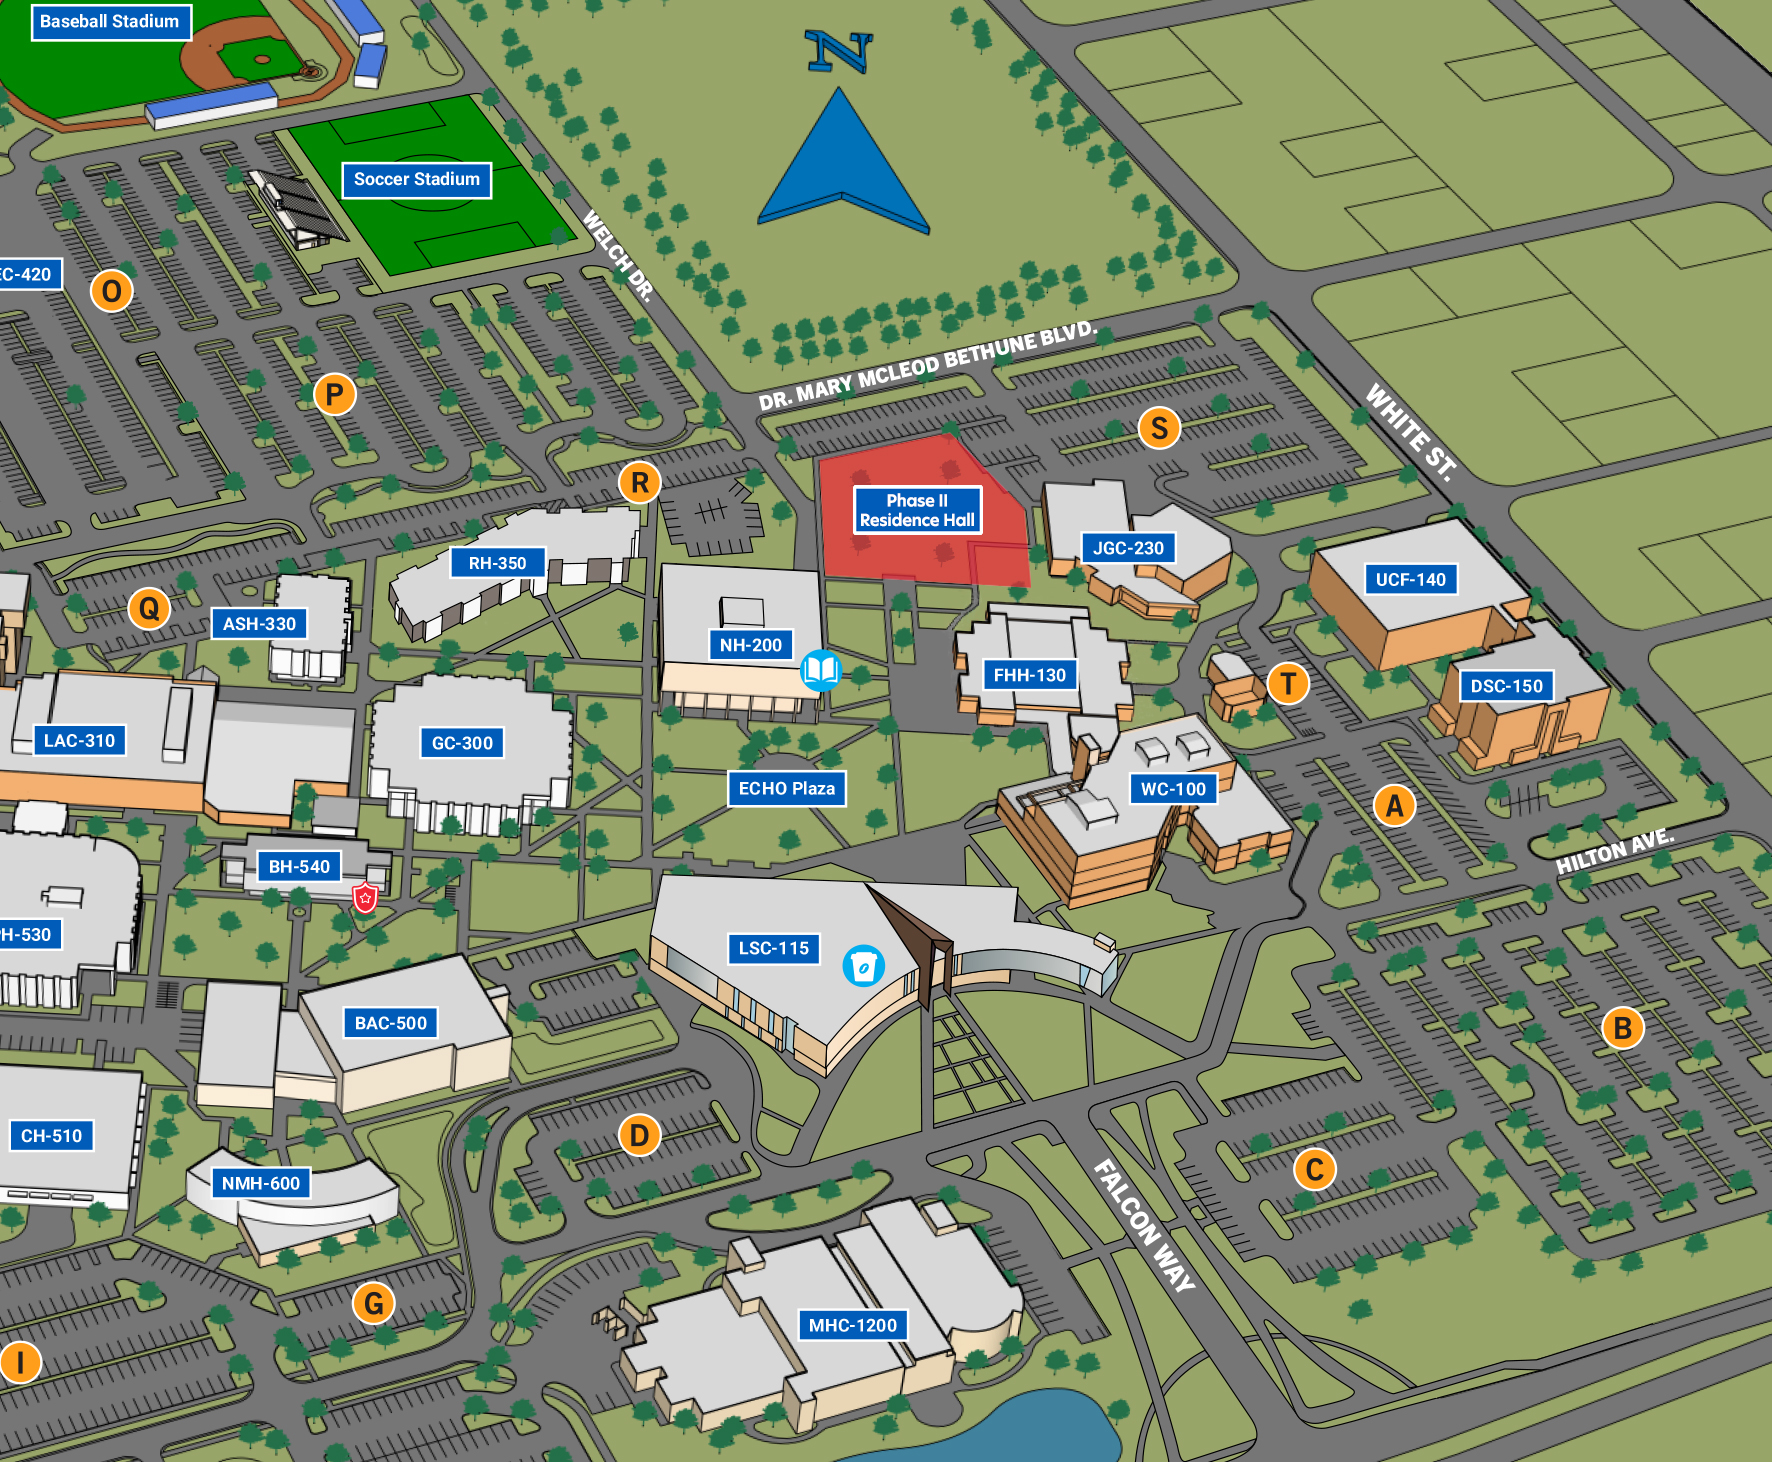 Campus map showing 2nd dorm location